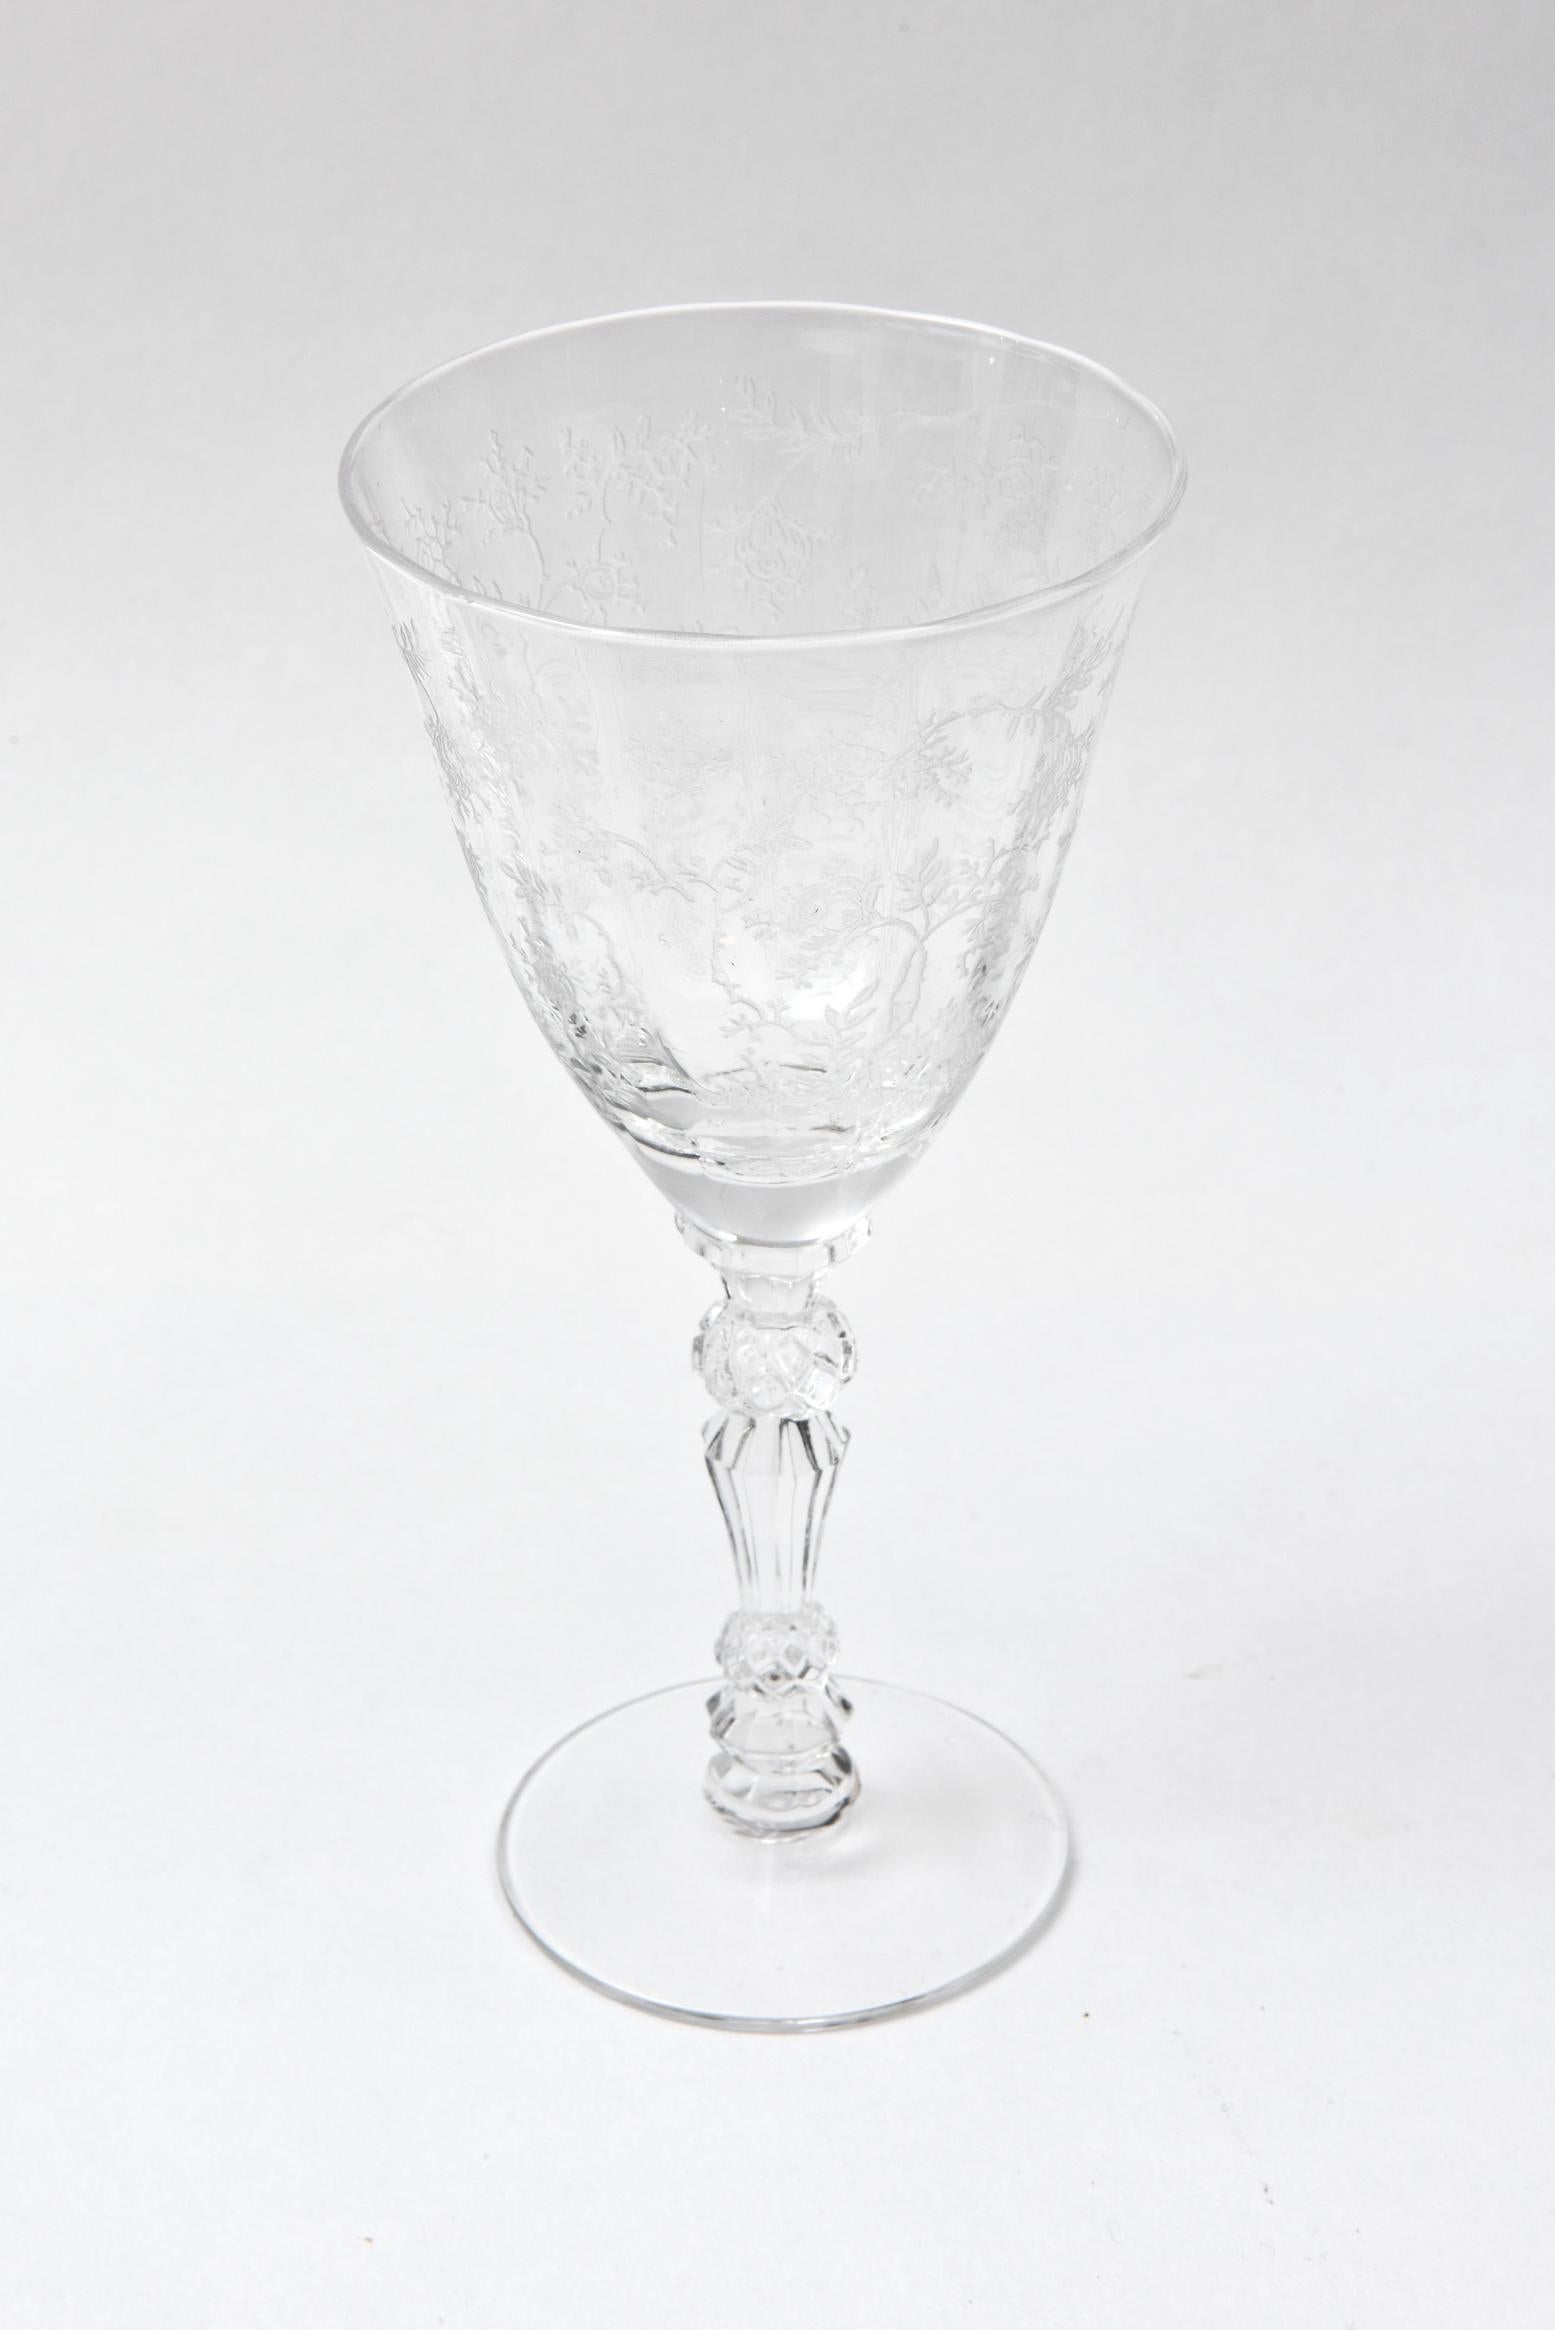 A great set of American crystal with nice etched floral detail to the bowls of the goblet and a very pretty double knob jewel stem. Crisp clear glass and nice proportions. Perfect to mix and match in with all your fine tabletop. Great condition.